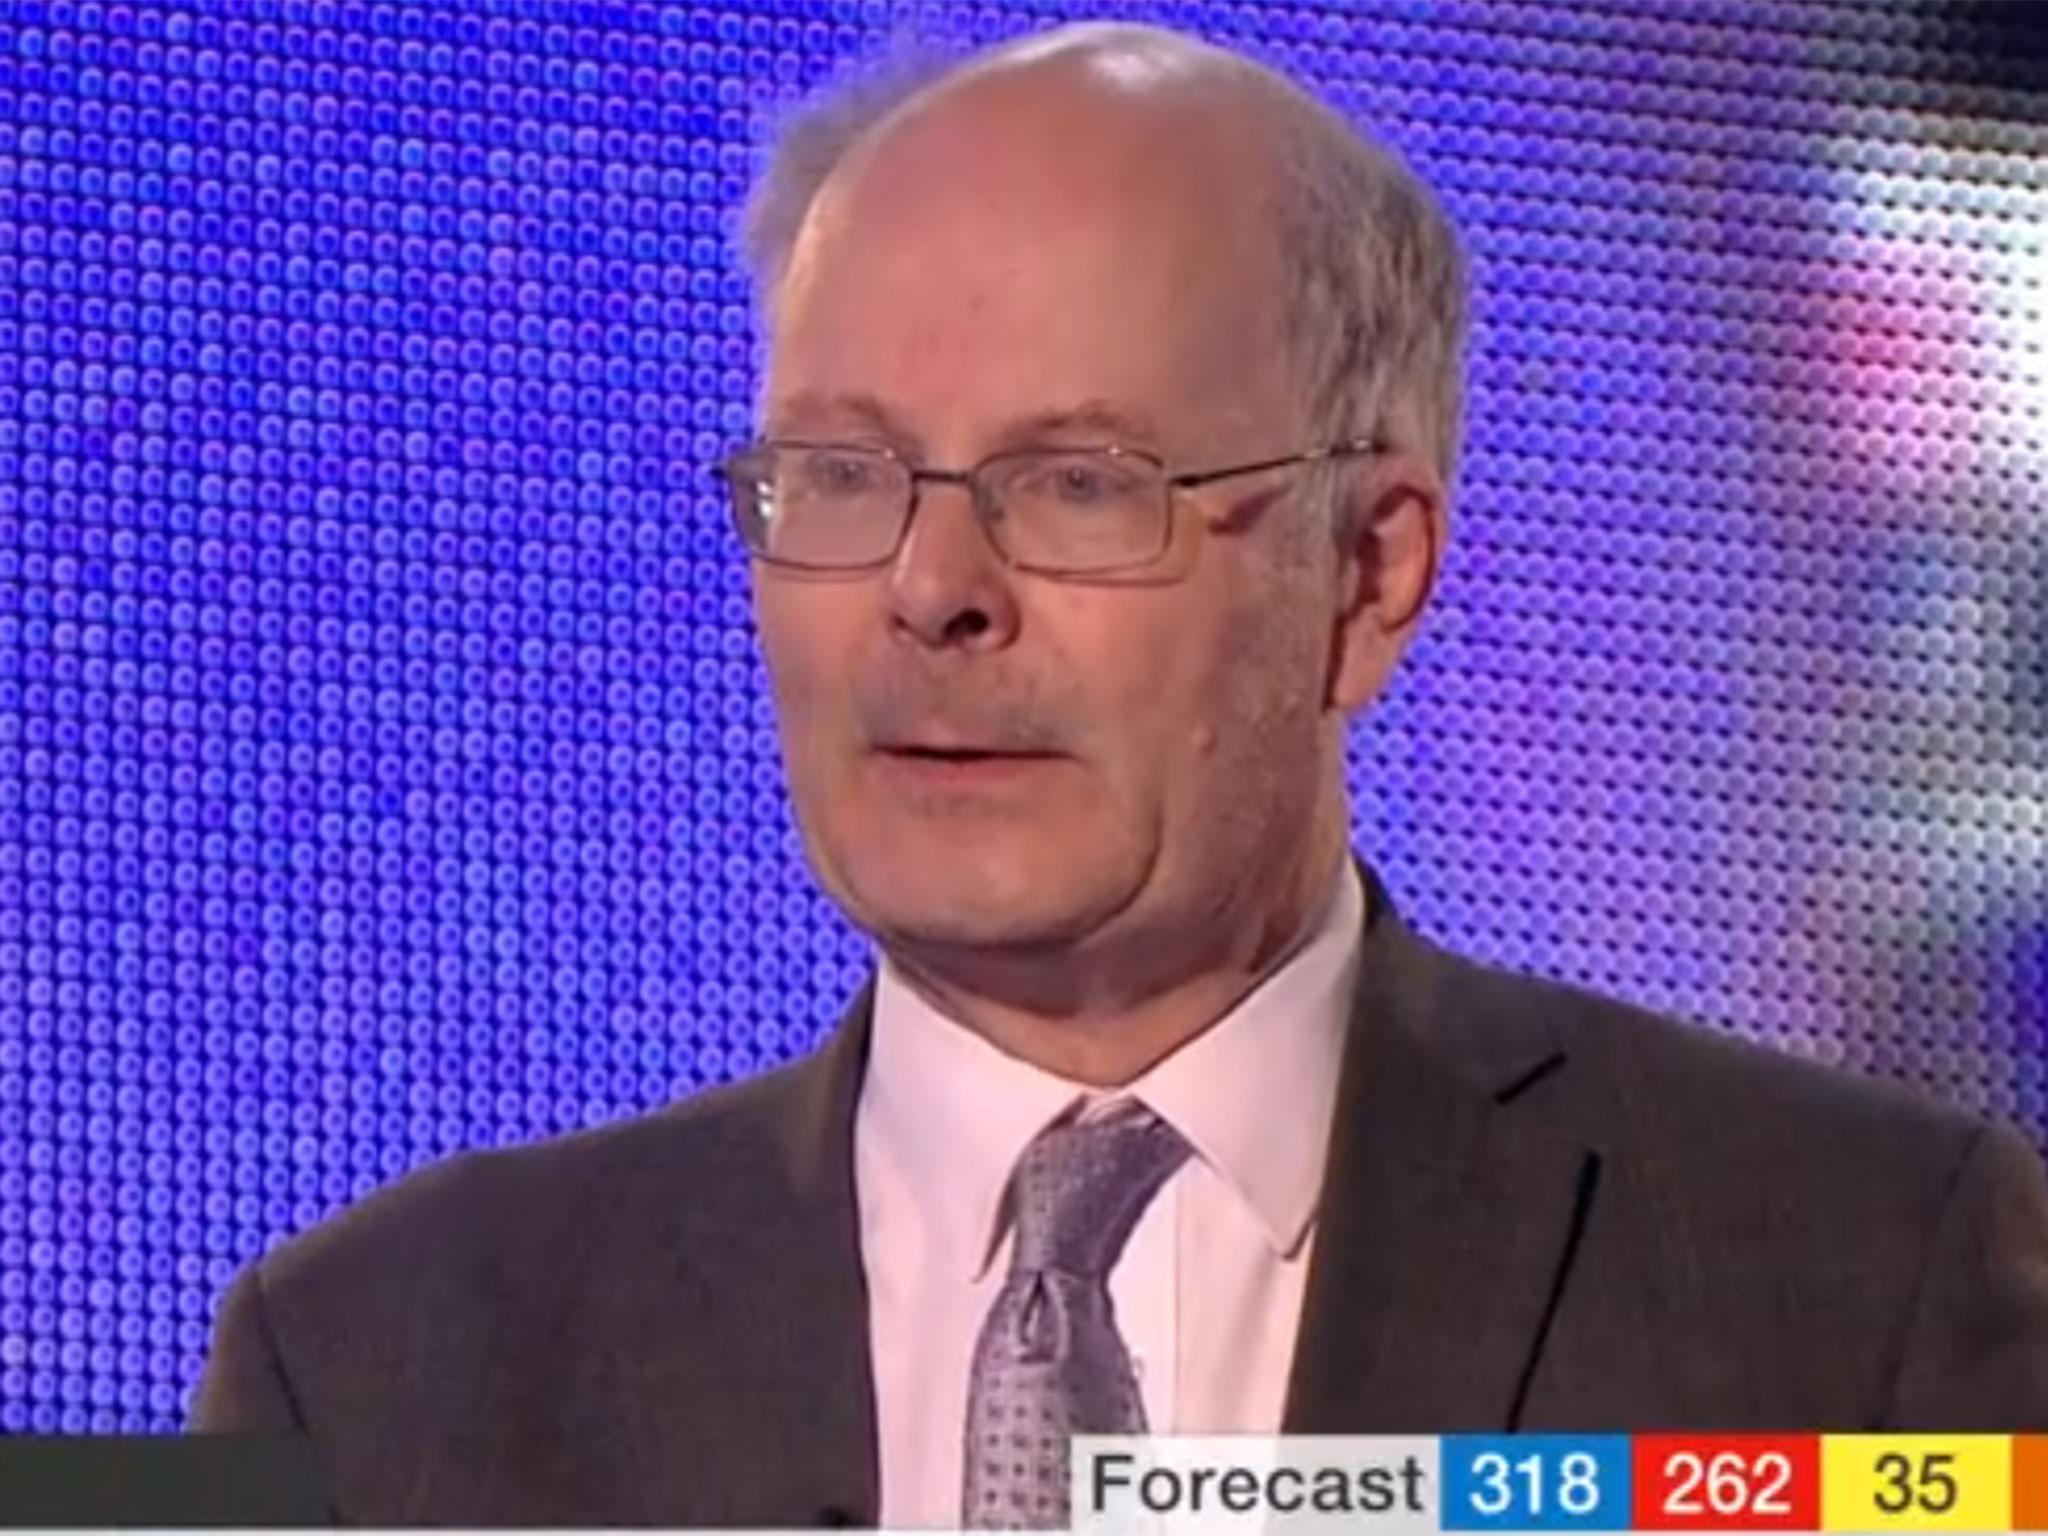 John Curtice's exit poll proved remarkably accurate